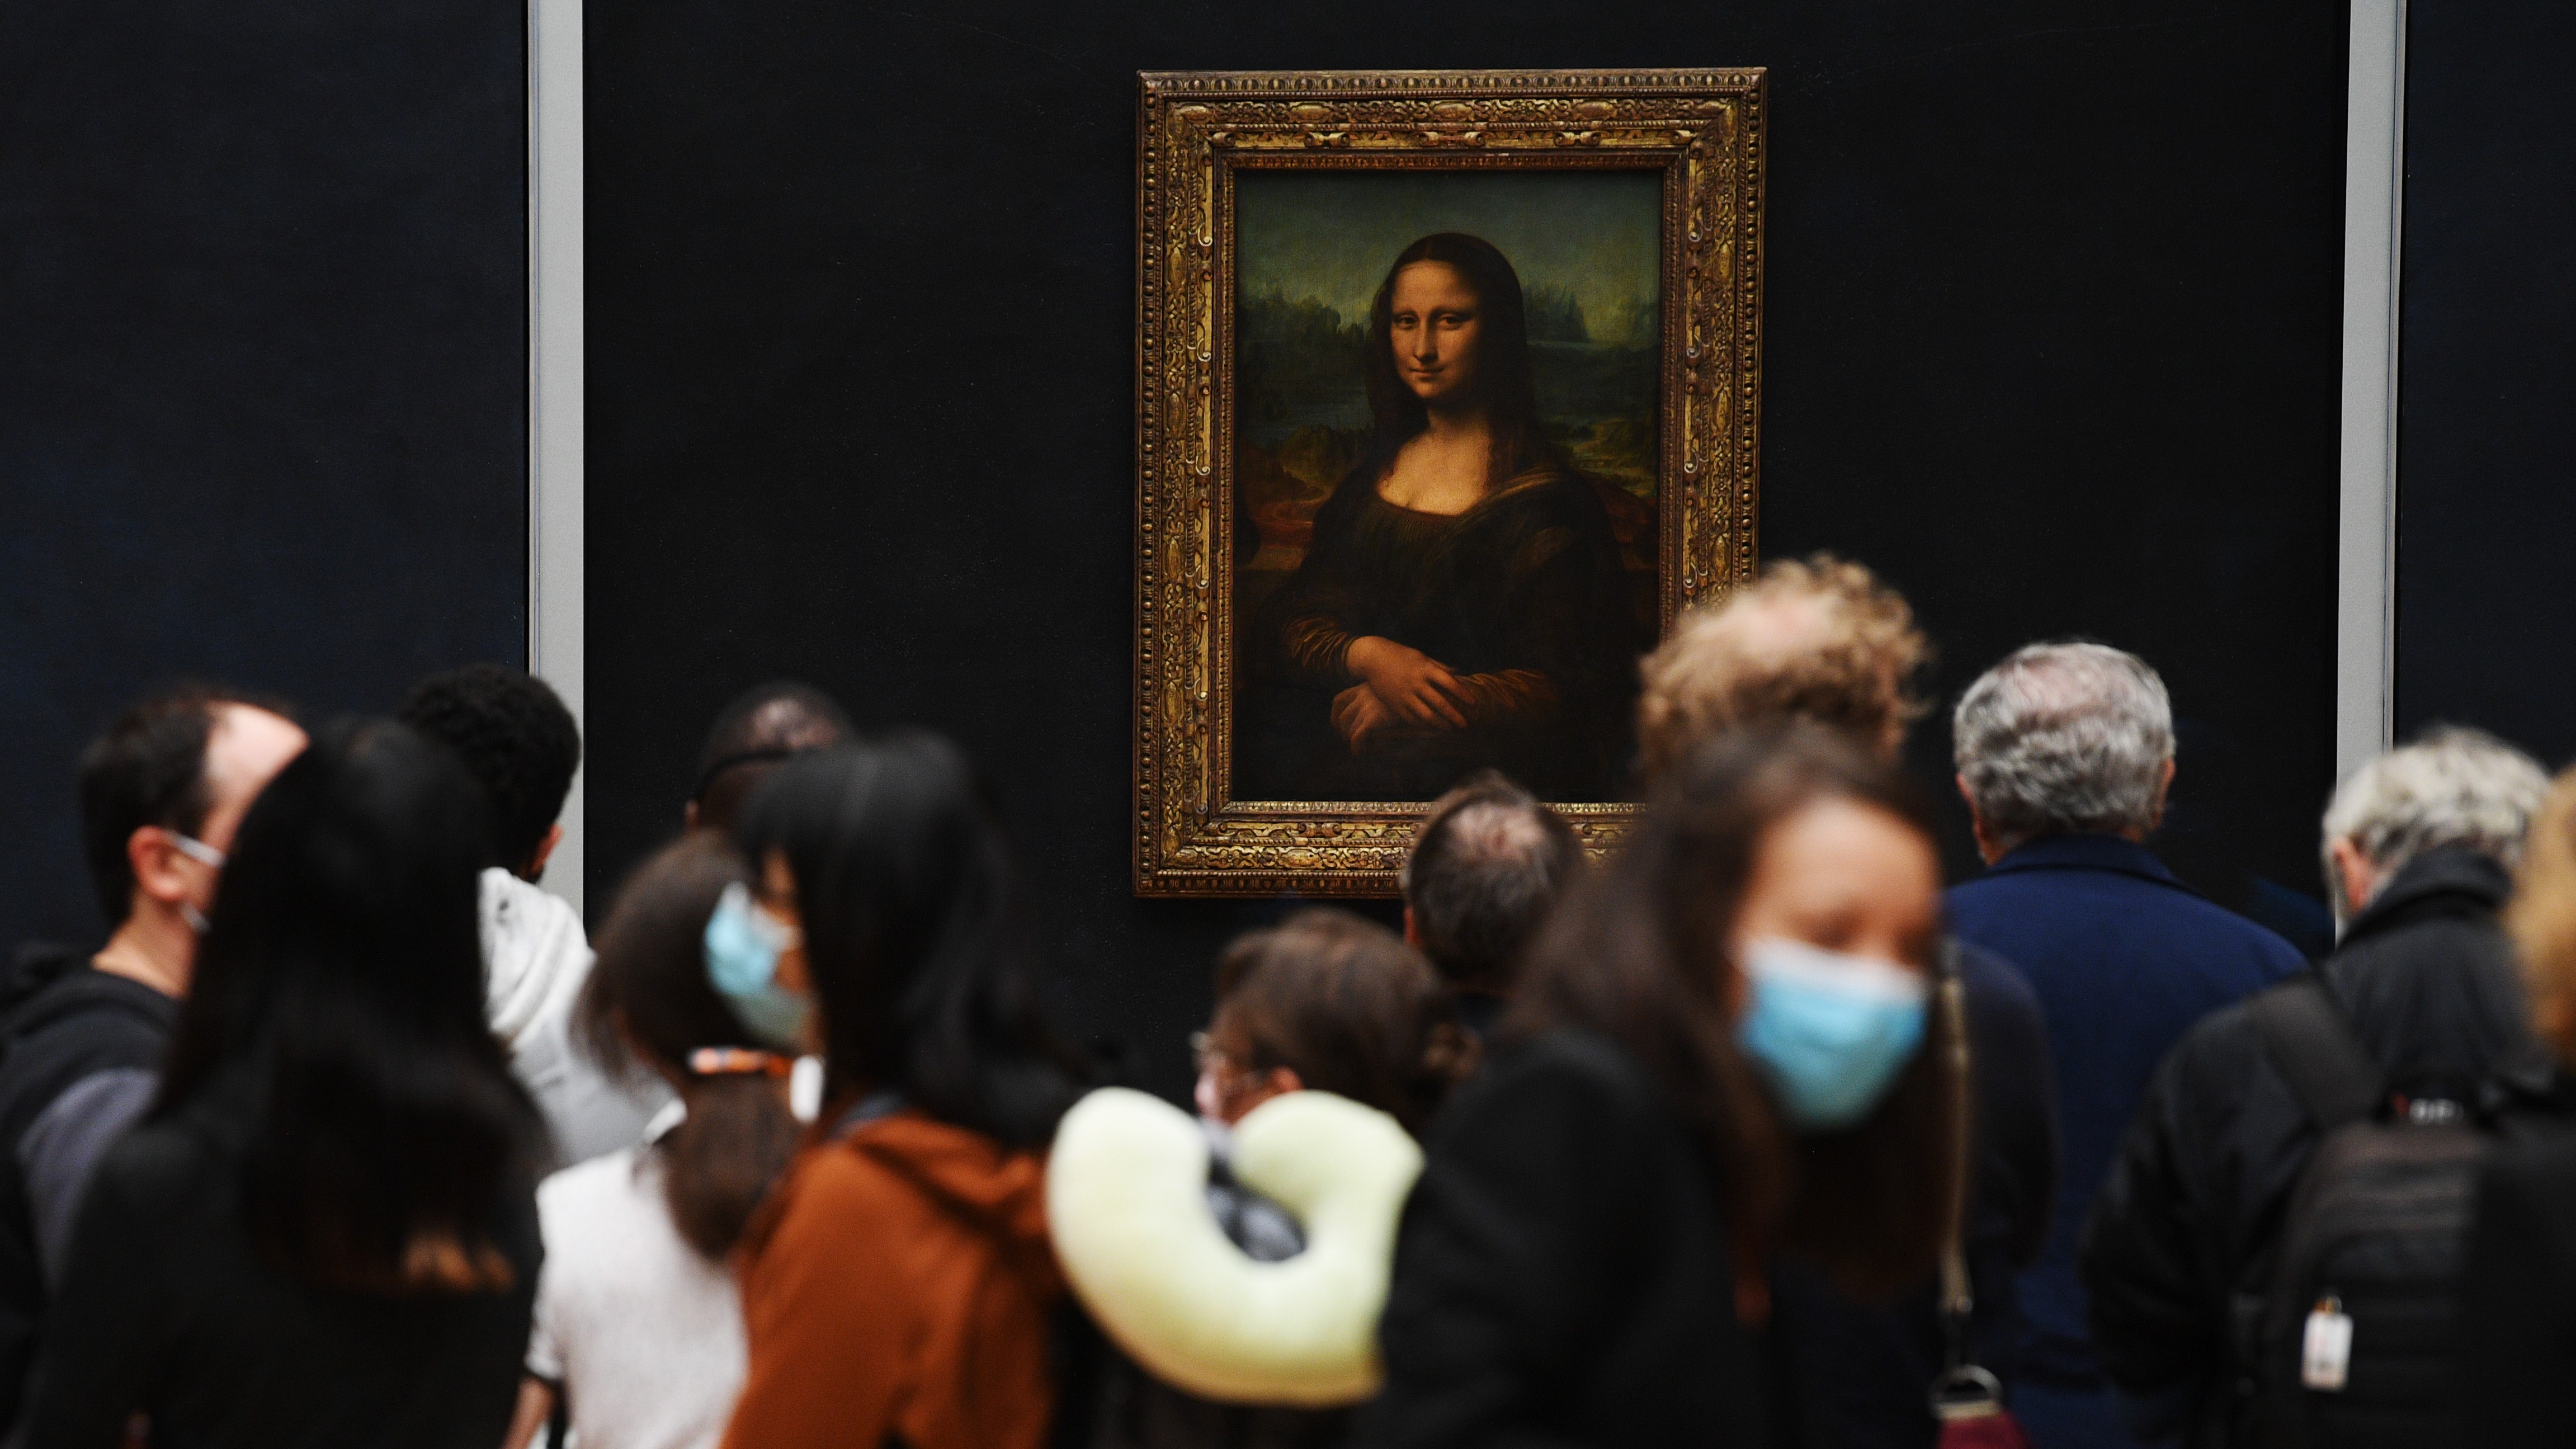 PARIS, FRANCE - JULY 06: Visitors queue observing social distancing marking to see Leonardo da Vinci's 'Mona Lisa' at the Louvre museum as it reopens its doors following its 16 week closure due to lockdown measures caused by the COVID-19 coronavirus pandemic, at the Louvre on July 6, 2020 in Paris, France. (Photo by Pascal Le Segretain/Getty Images)